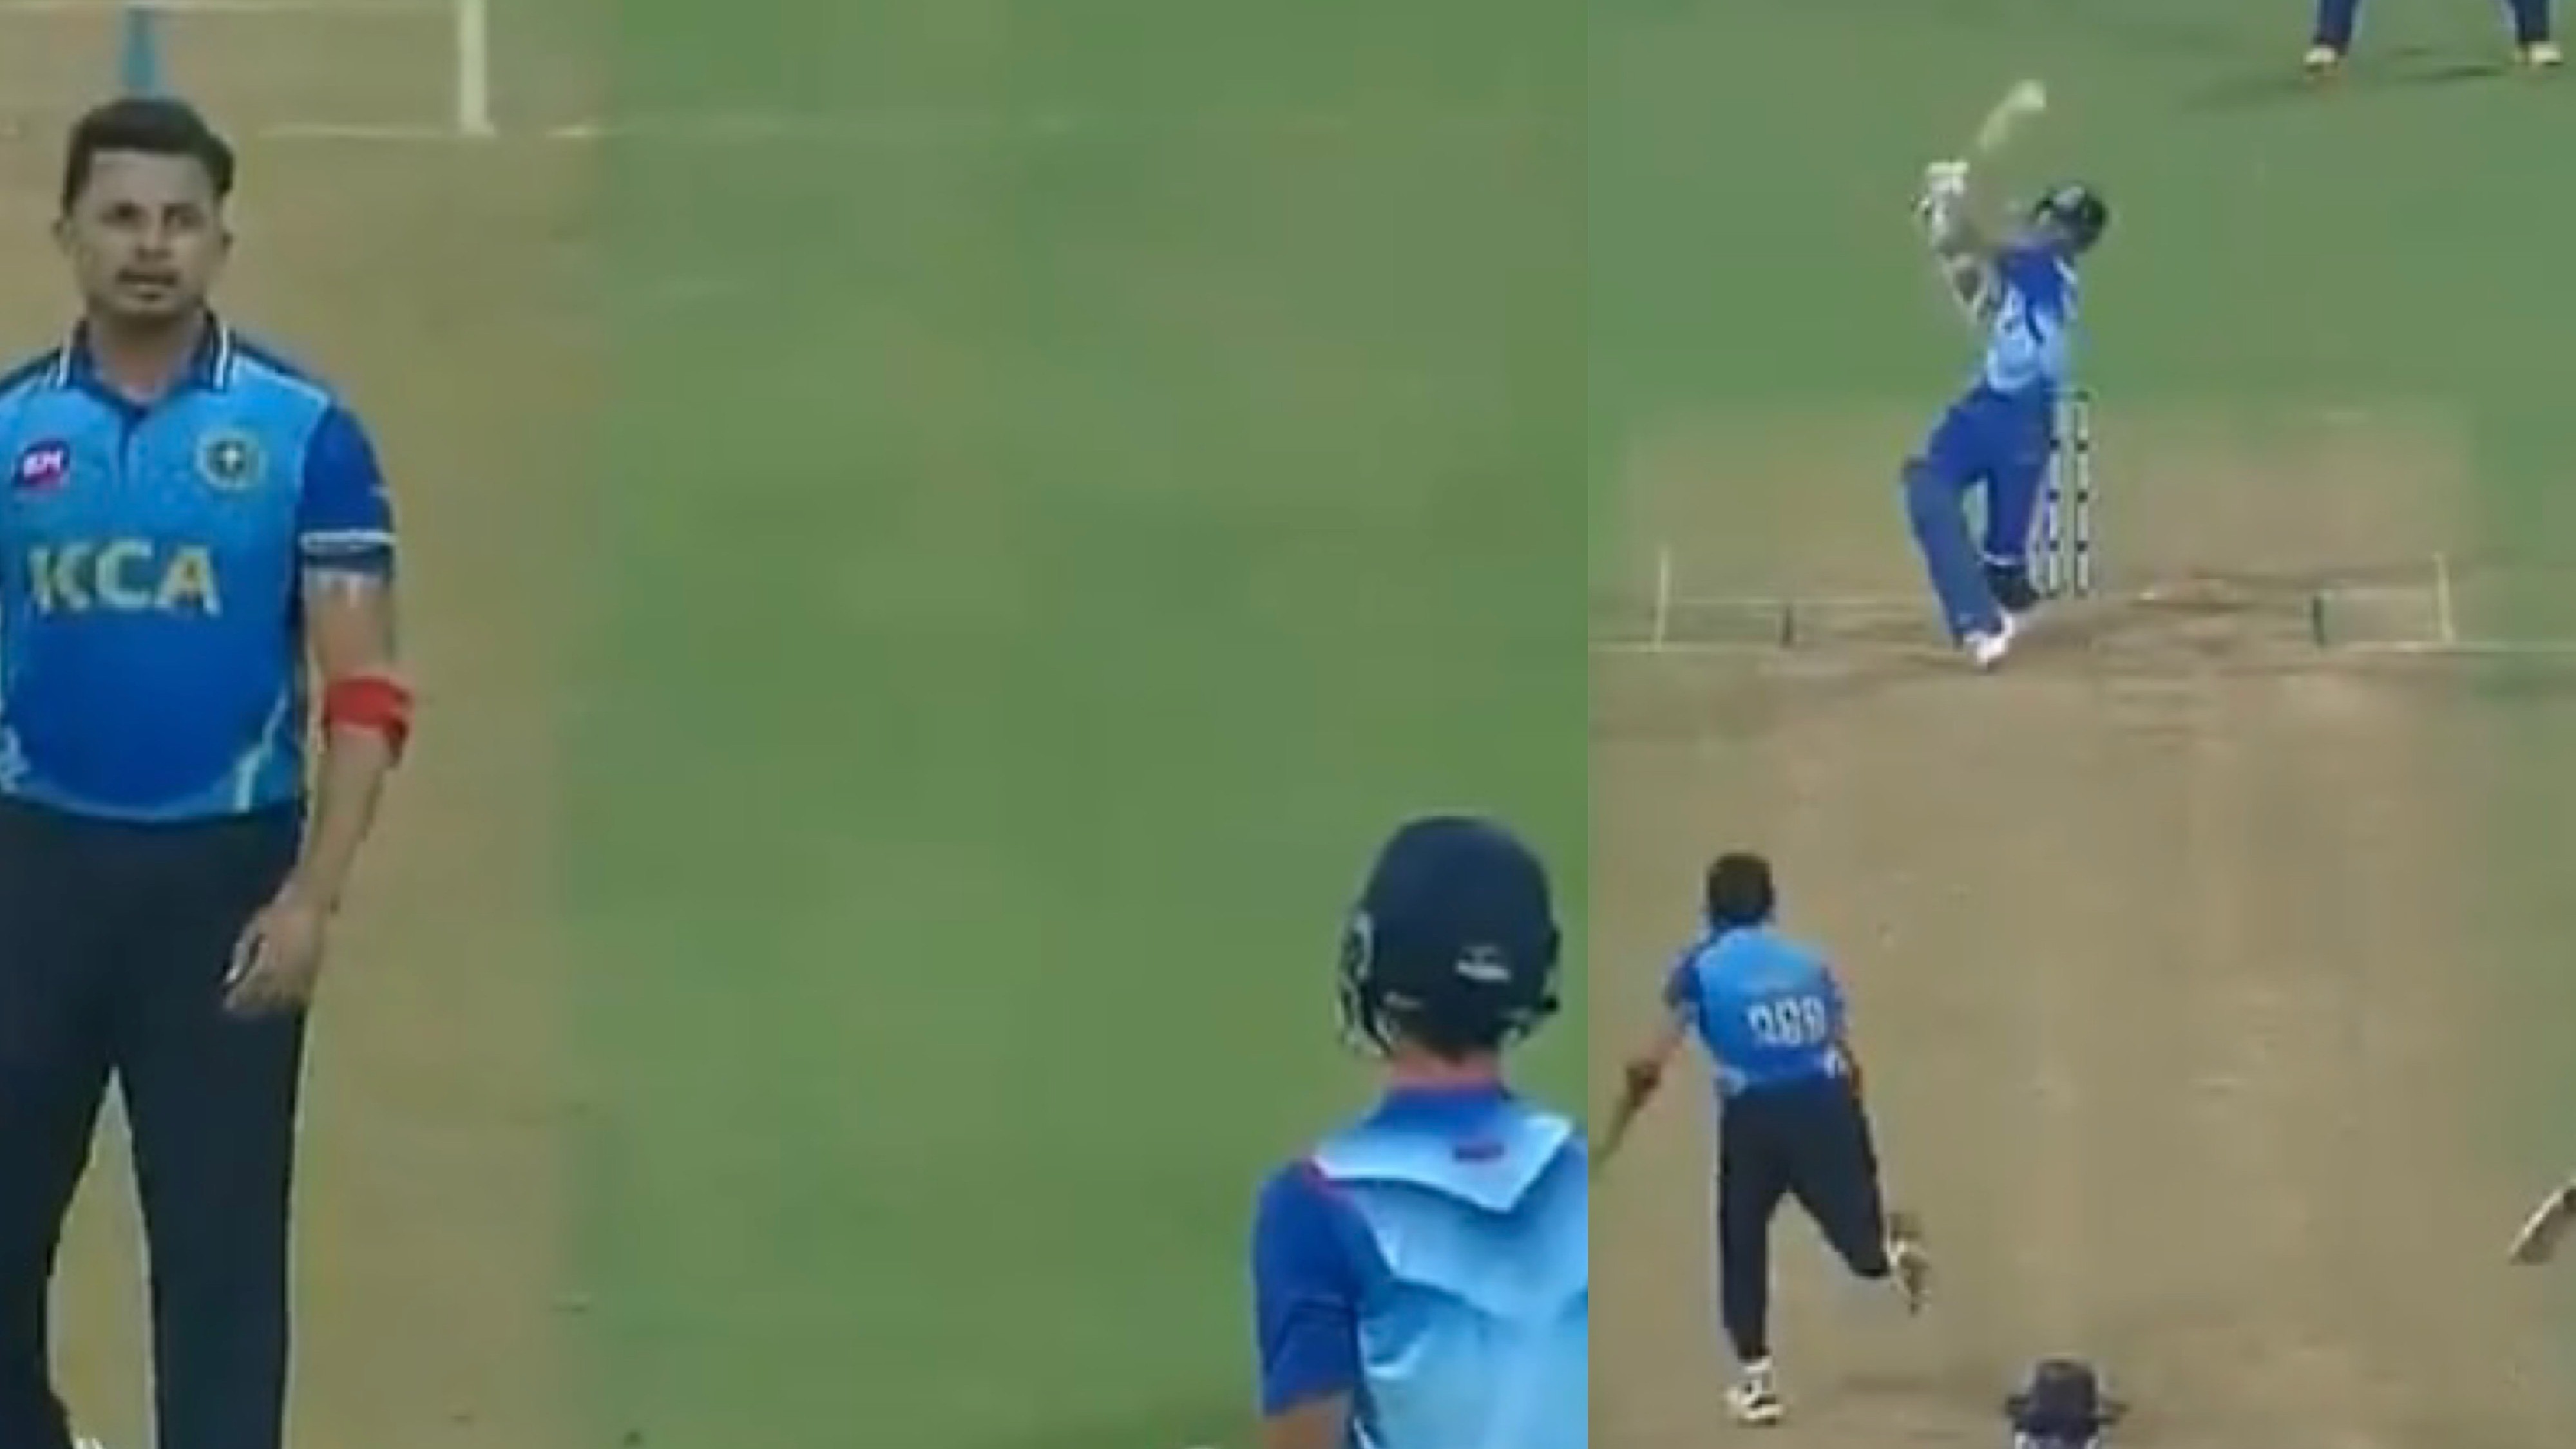 SMA Trophy 2021: WATCH - Yashasvi Jaiswal hits Sreesanth for two consecutive sixes after a stare down